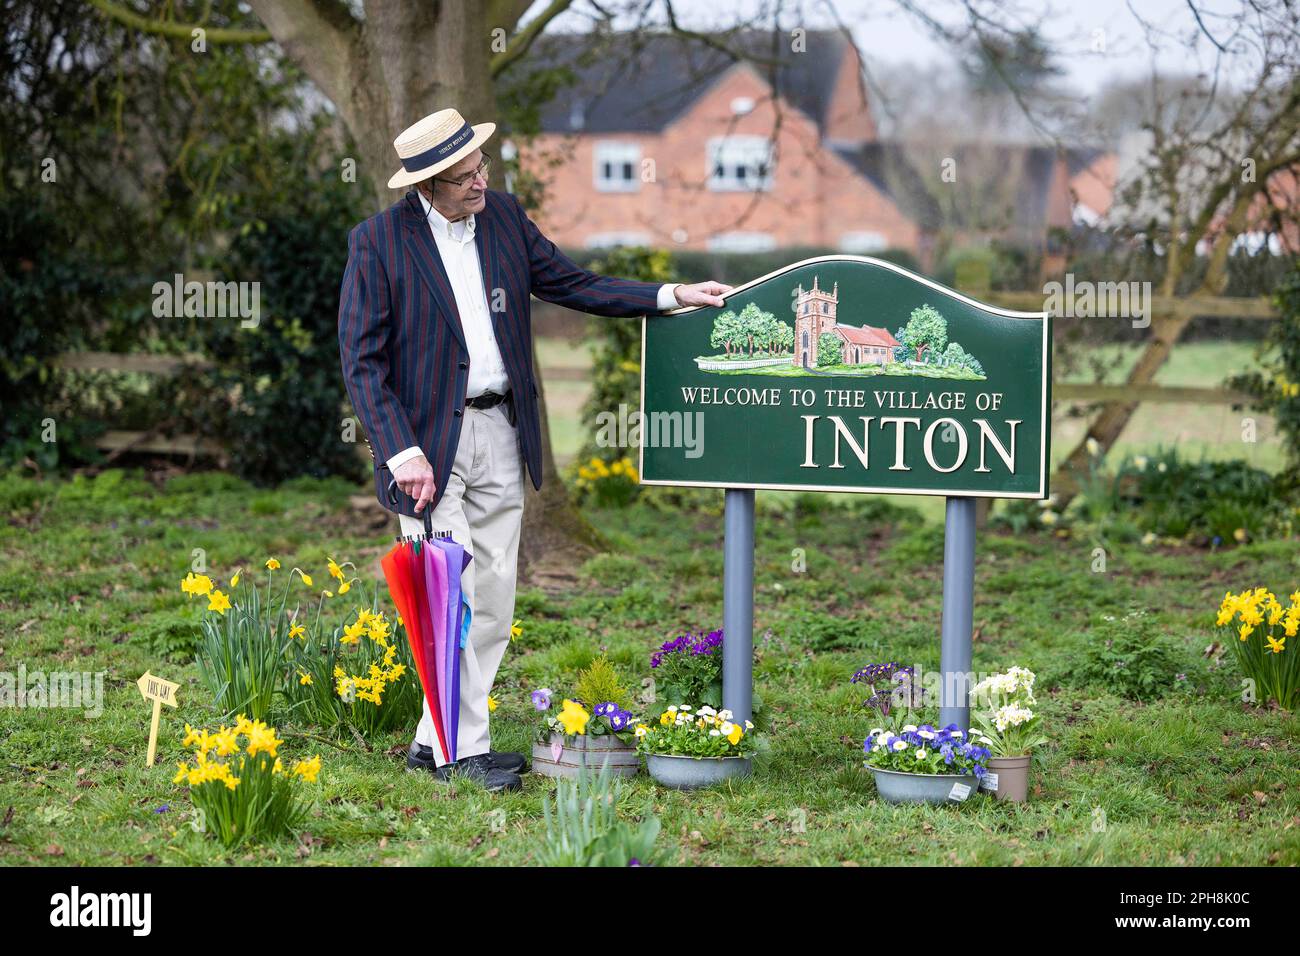 EDITORIAL USE ONLY Local Chris Marples looks at a sign where the 'egg' is missing in Egginton, Derbyshire where the word 'egg' has been removed from various signs around the village as part of the return of 'Cadbury Worldwide Hide', a virtual Easter egg hide where people can hide an Easter egg anywhere in the world for a loved one to find. Issue date: Monday March 27, 2023. Stock Photo